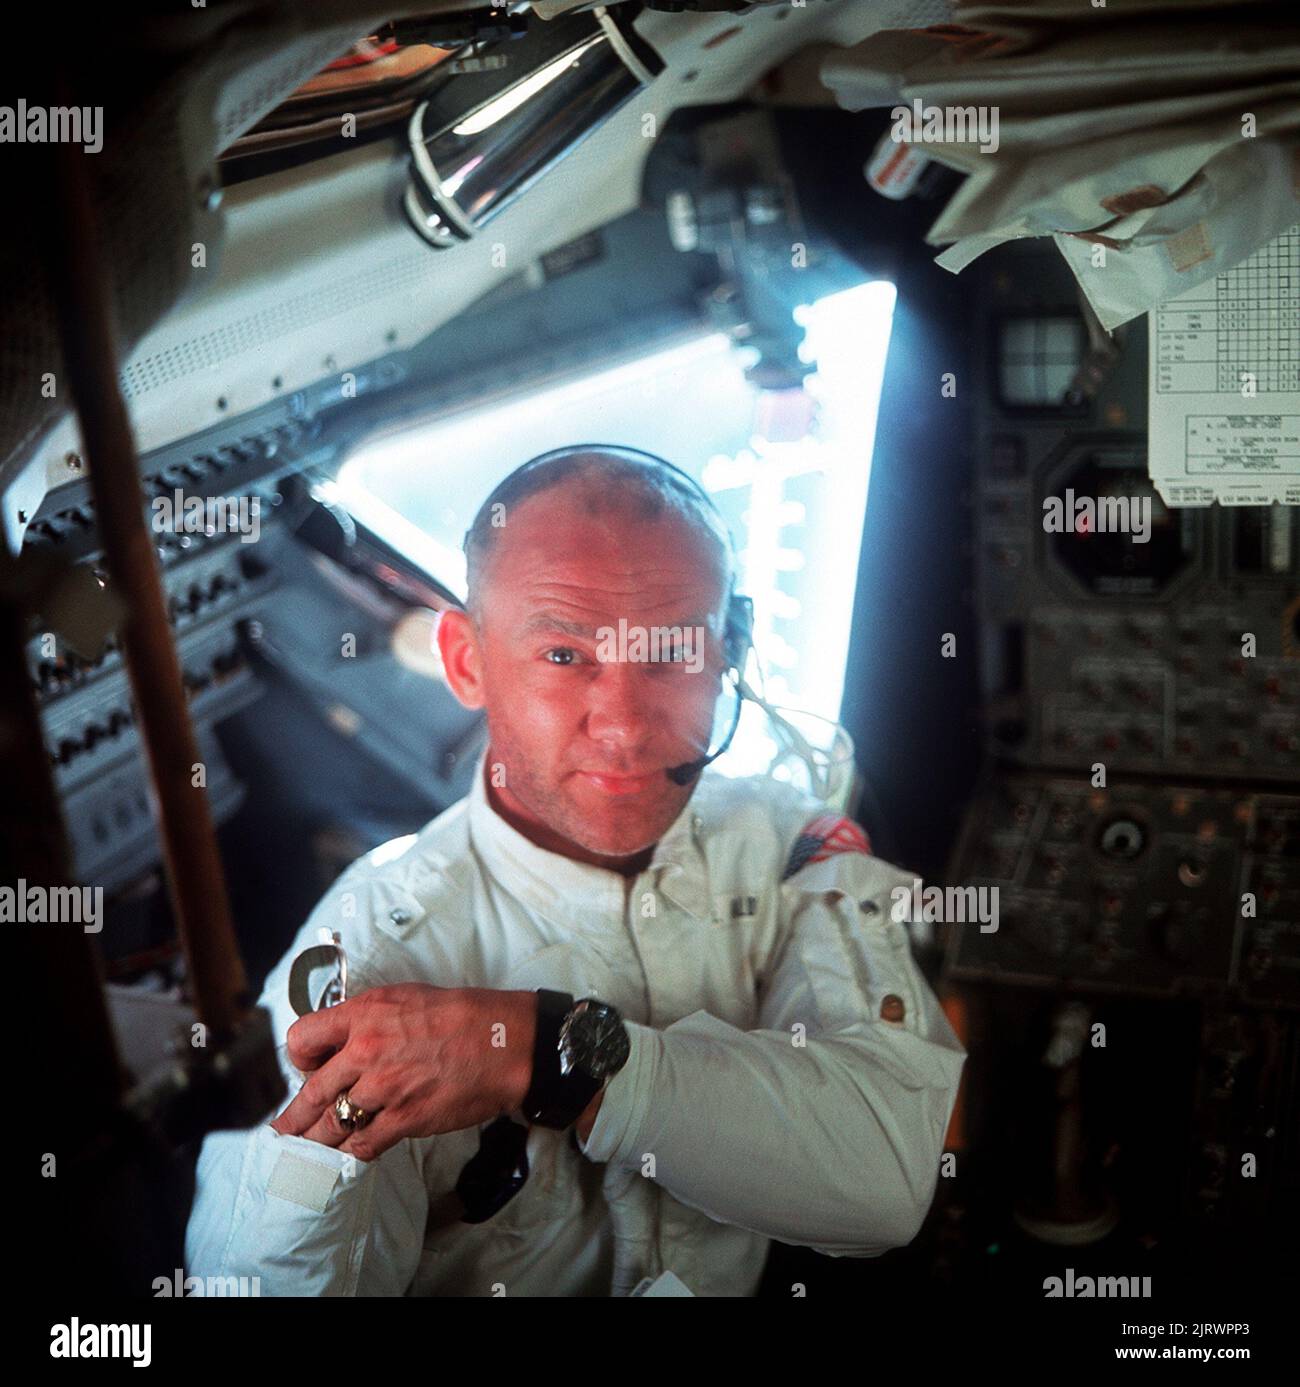 SEA OF TRANQUILITY, THE MOON, EARTH - 20 July 1969 - This interior view of the Apollo 11 Lunar Module (LM) shows astronaut Edwin E. Aldrin Jr., lunar Stock Photo